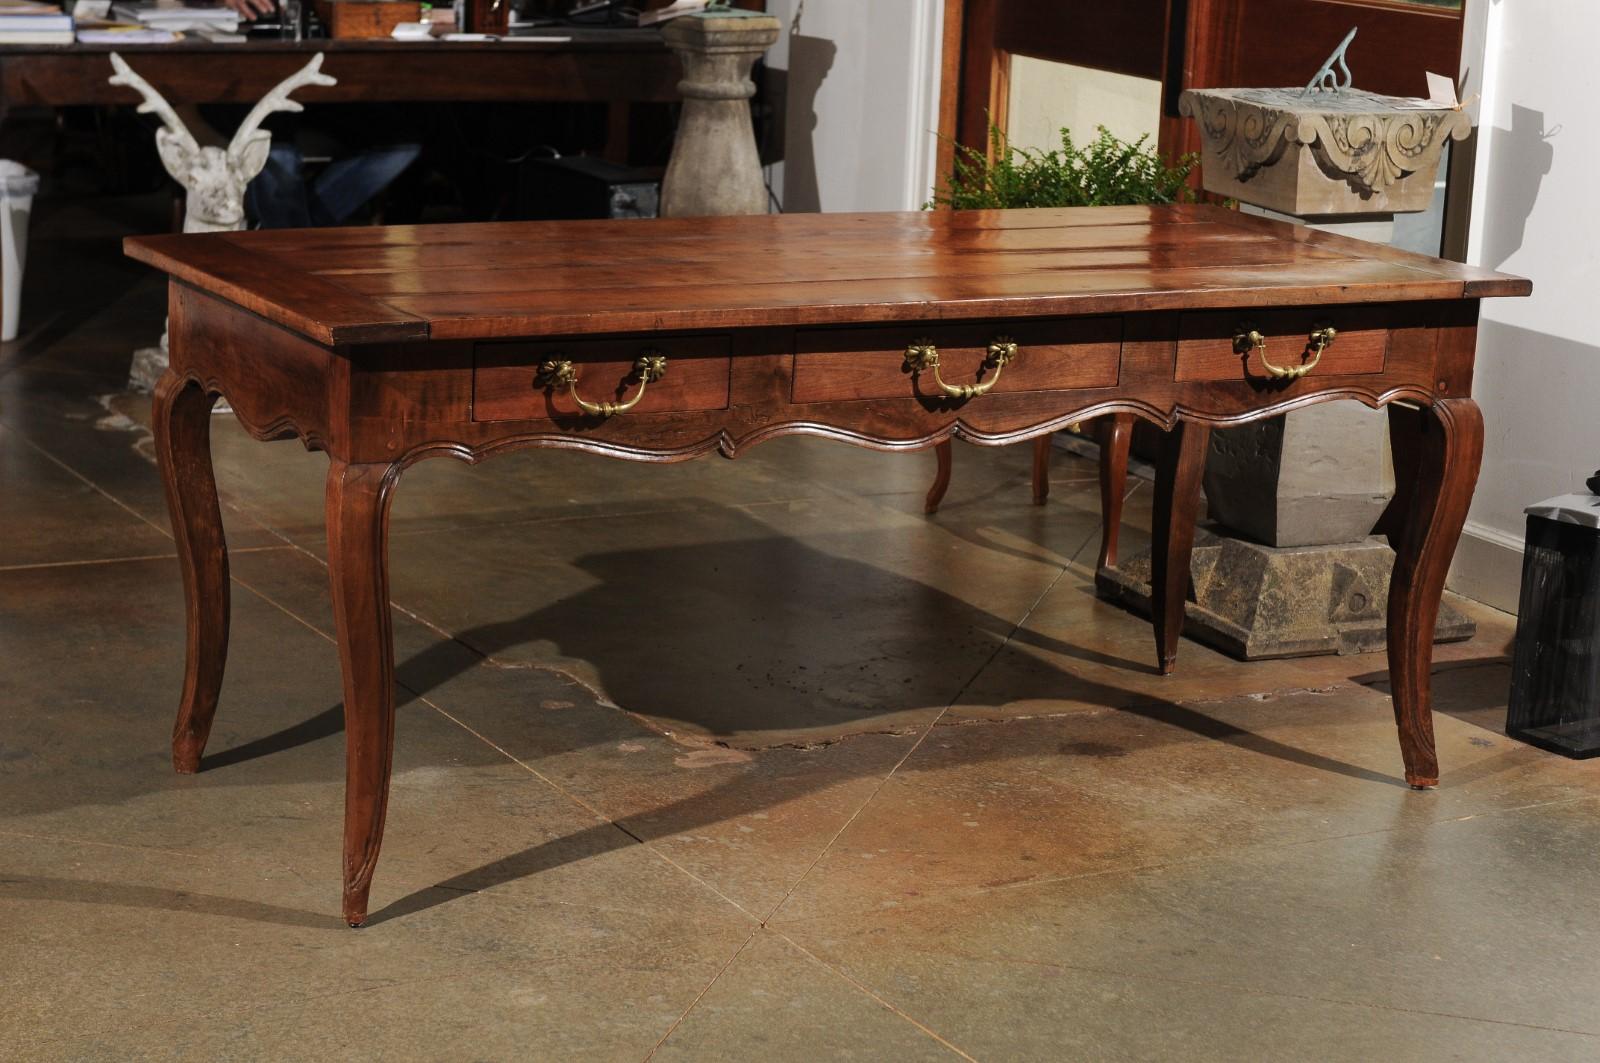 A French Louis XV style cherry farm table from the 19th century, with three drawers and cabriole legs. Born in France during the 19th century, this elegant farm table presents the stylistic traits of the Louis XV period. The table features a